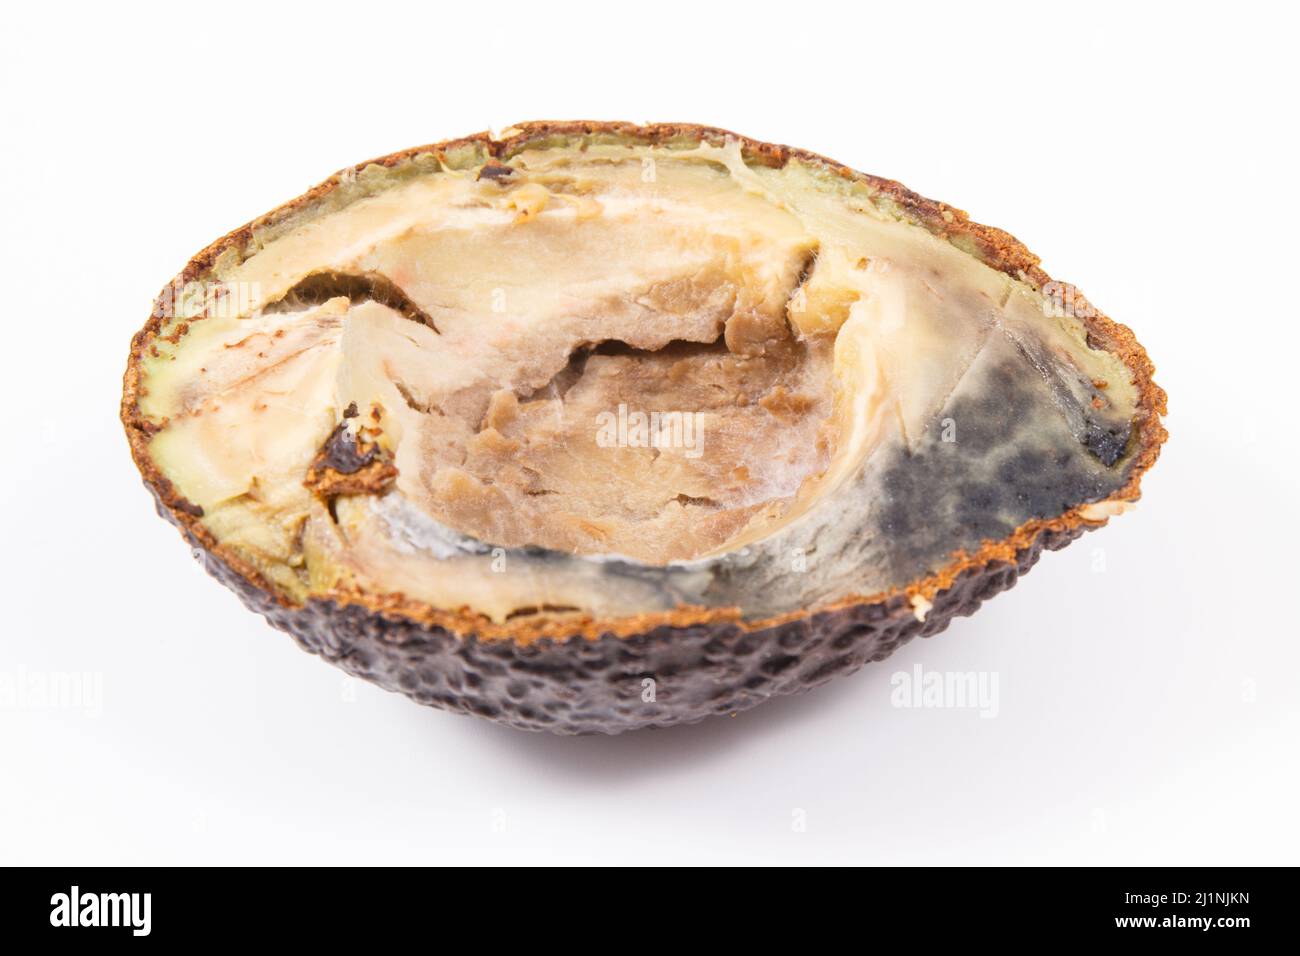 Inedible avocado with mold on white background. Unhealthy food Stock Photo